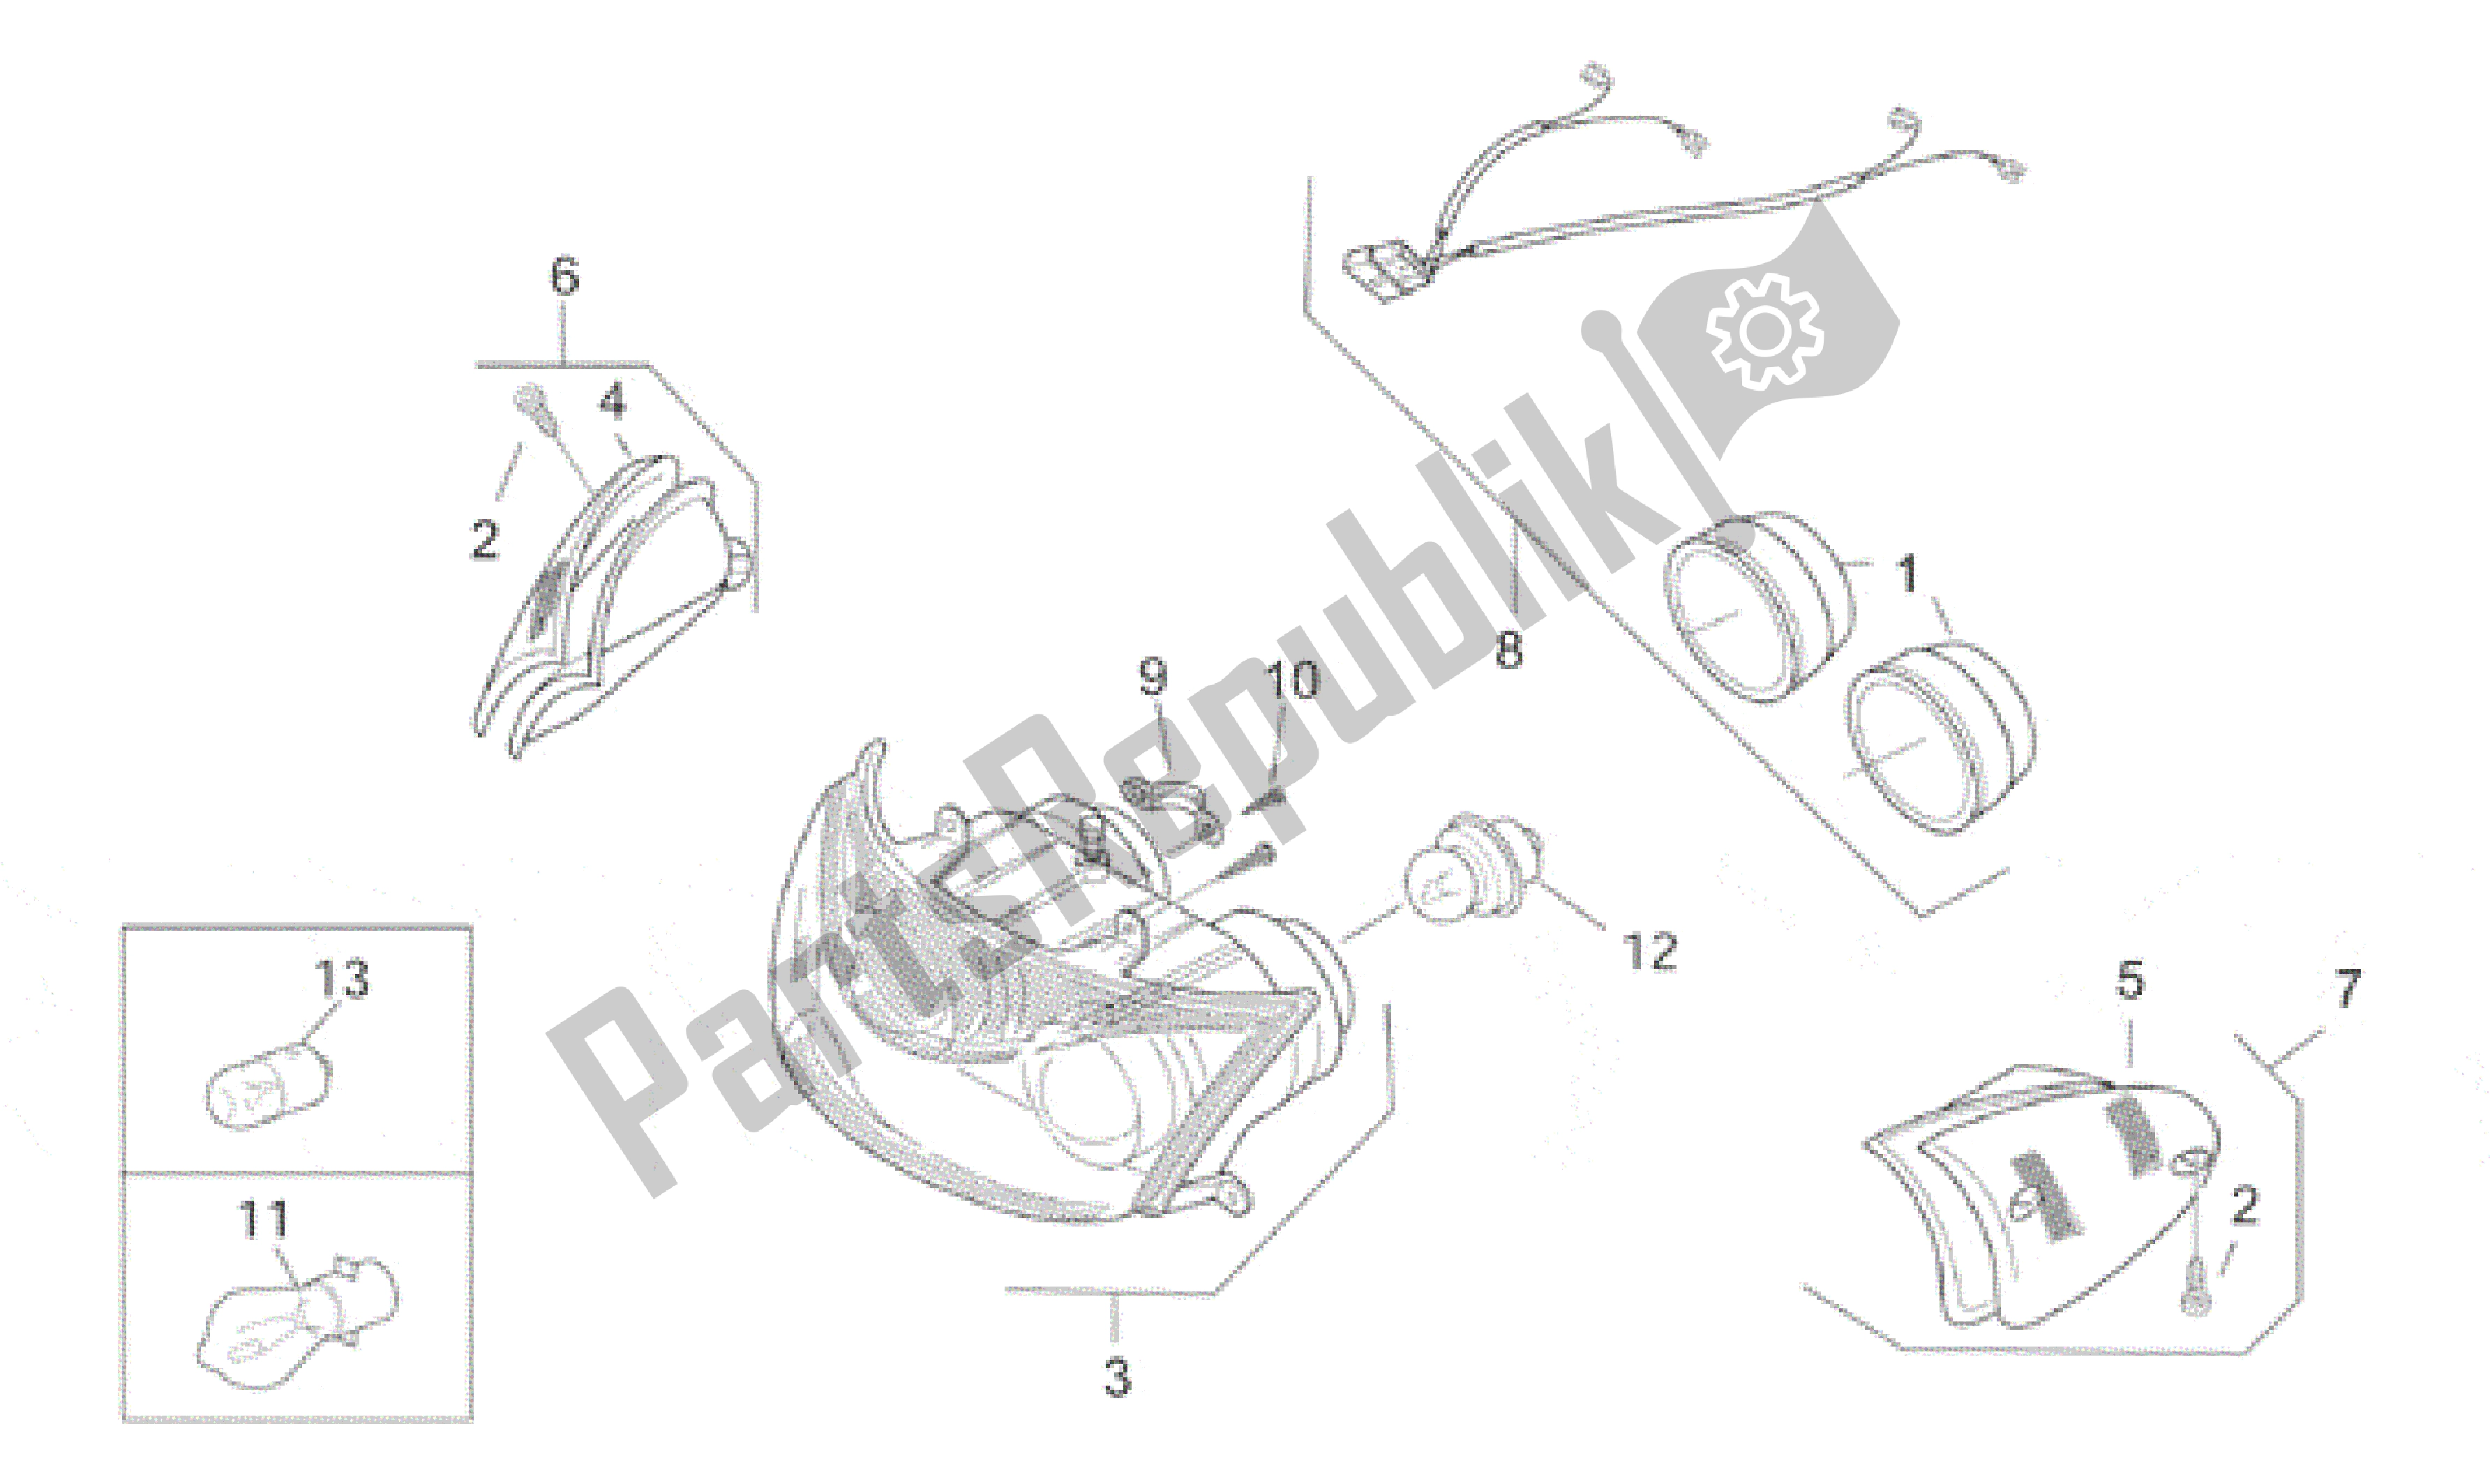 All parts for the Front Lights of the Aprilia SR WWW 50 1997 - 1999